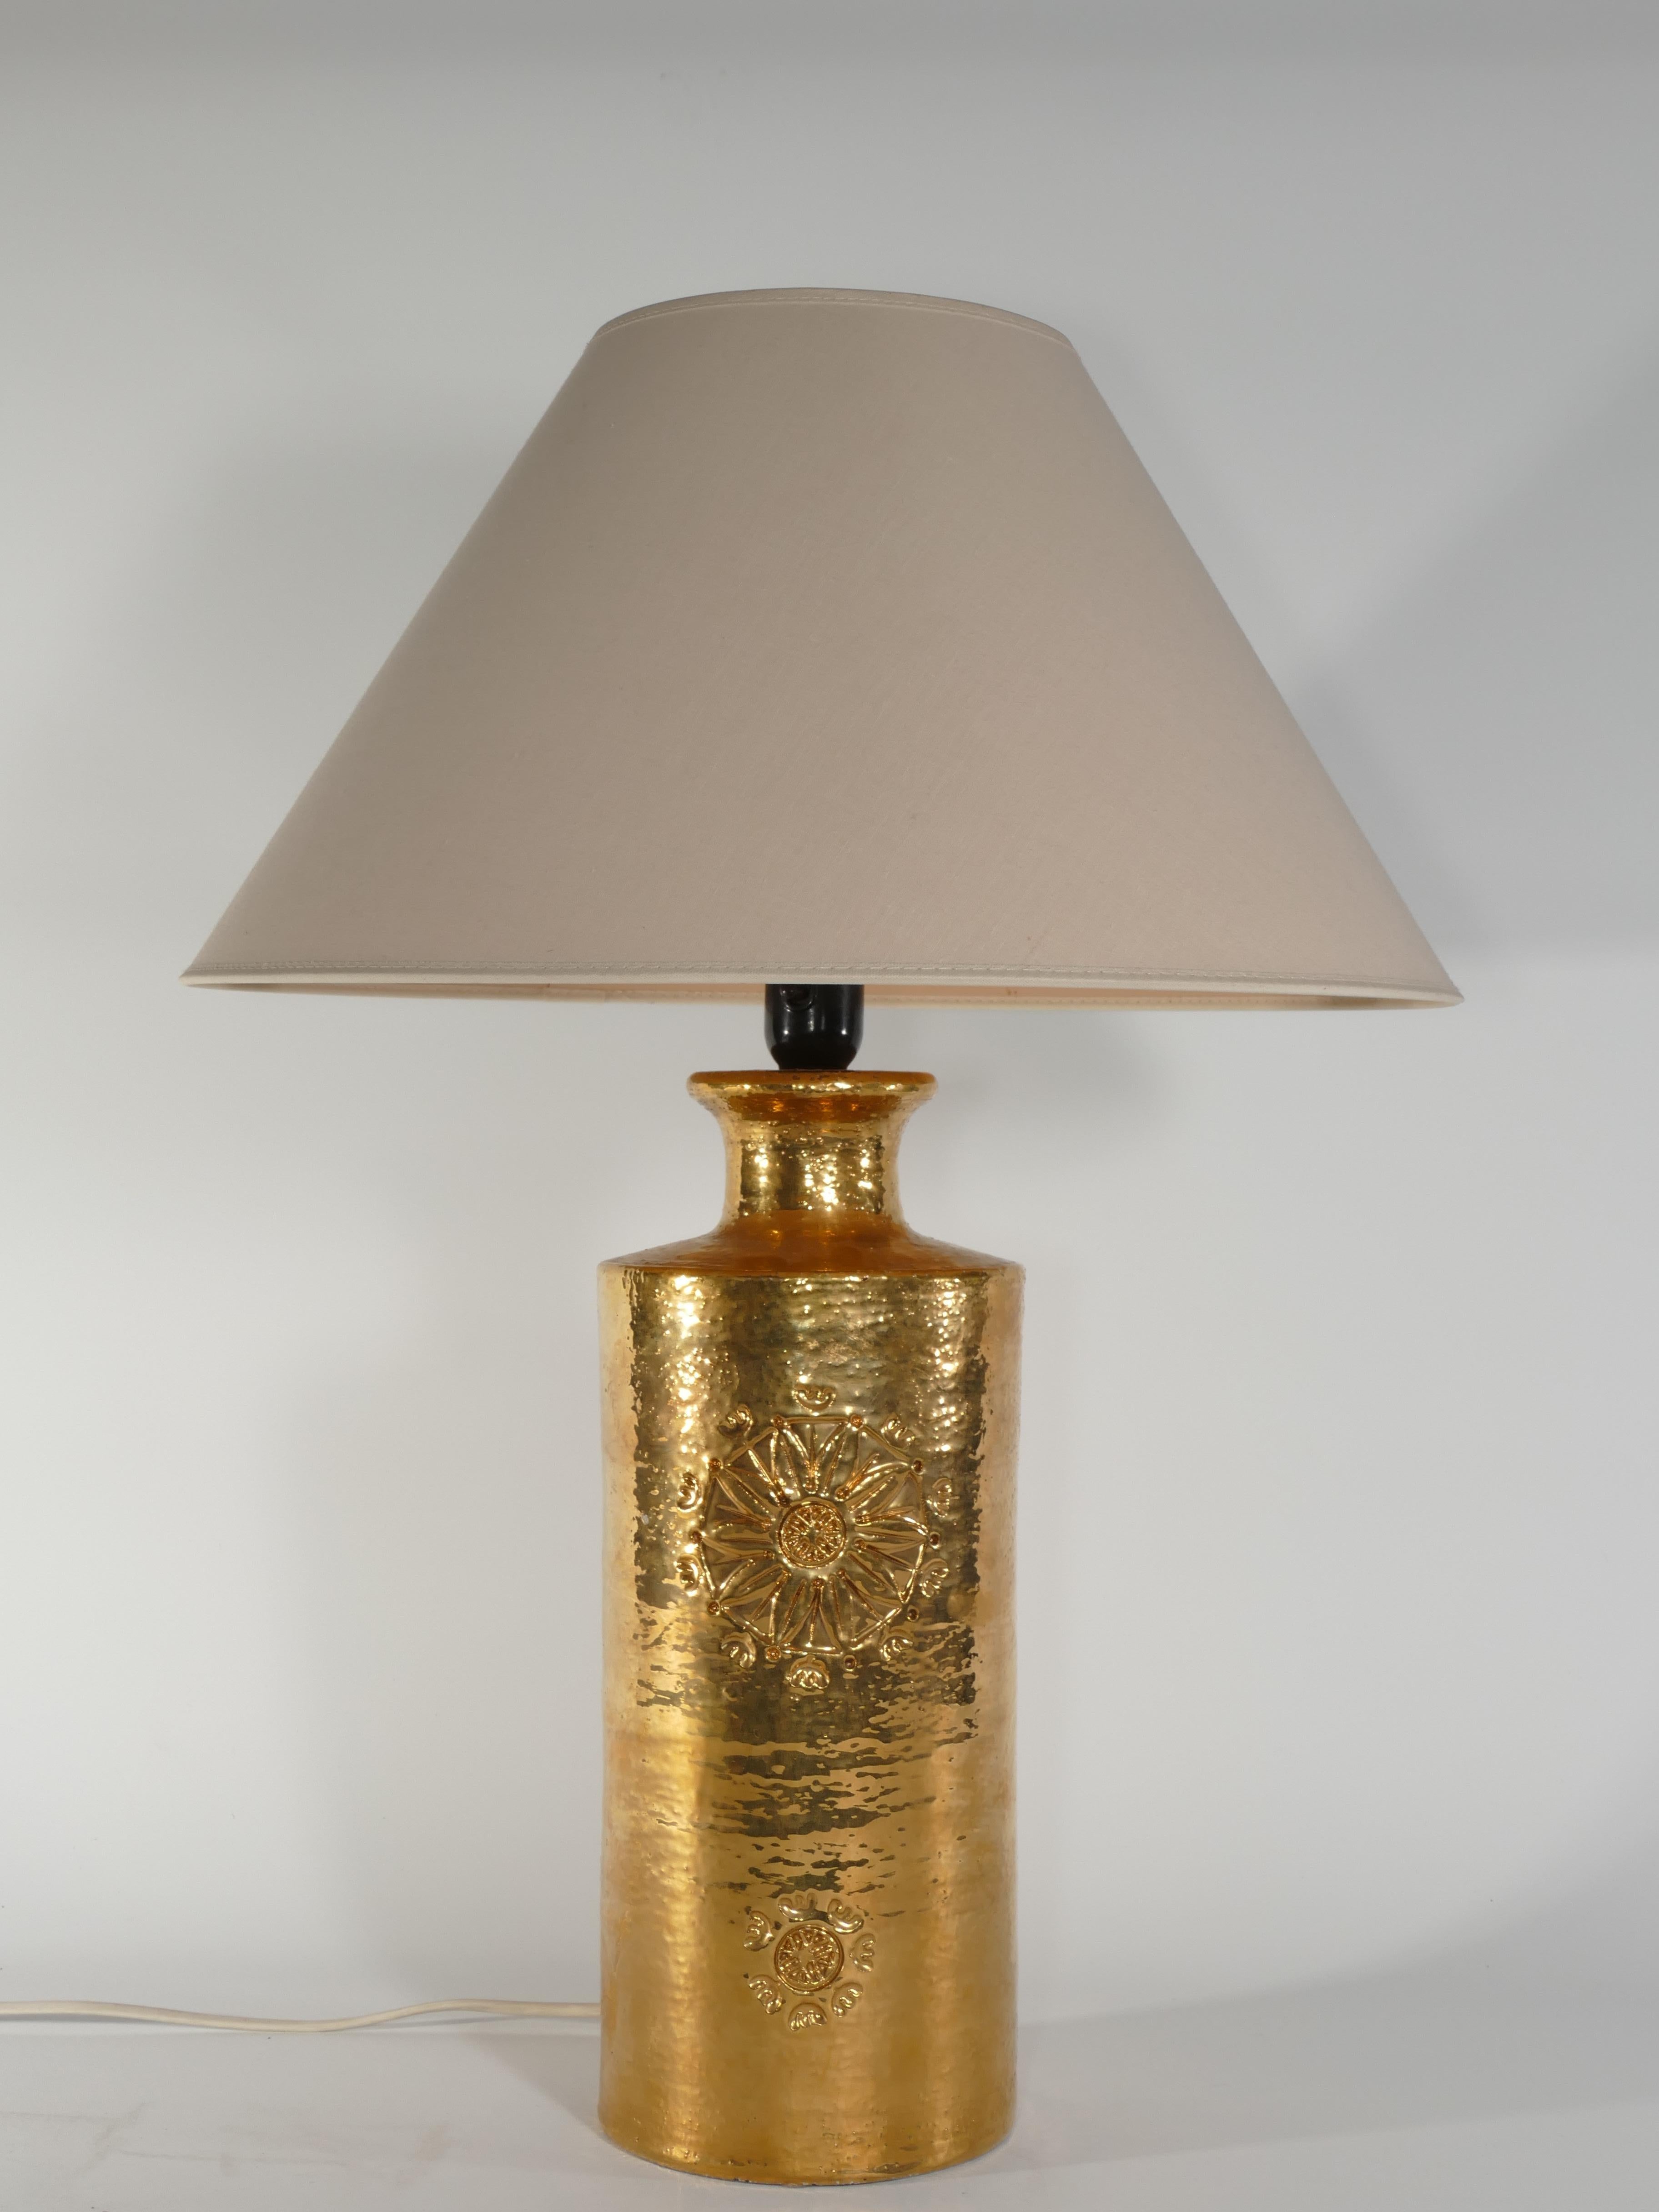 Hand-Crafted Gold Glazed Ceramic Table Lamps by Bitossi for Bergboms, Set of 2, 1970's